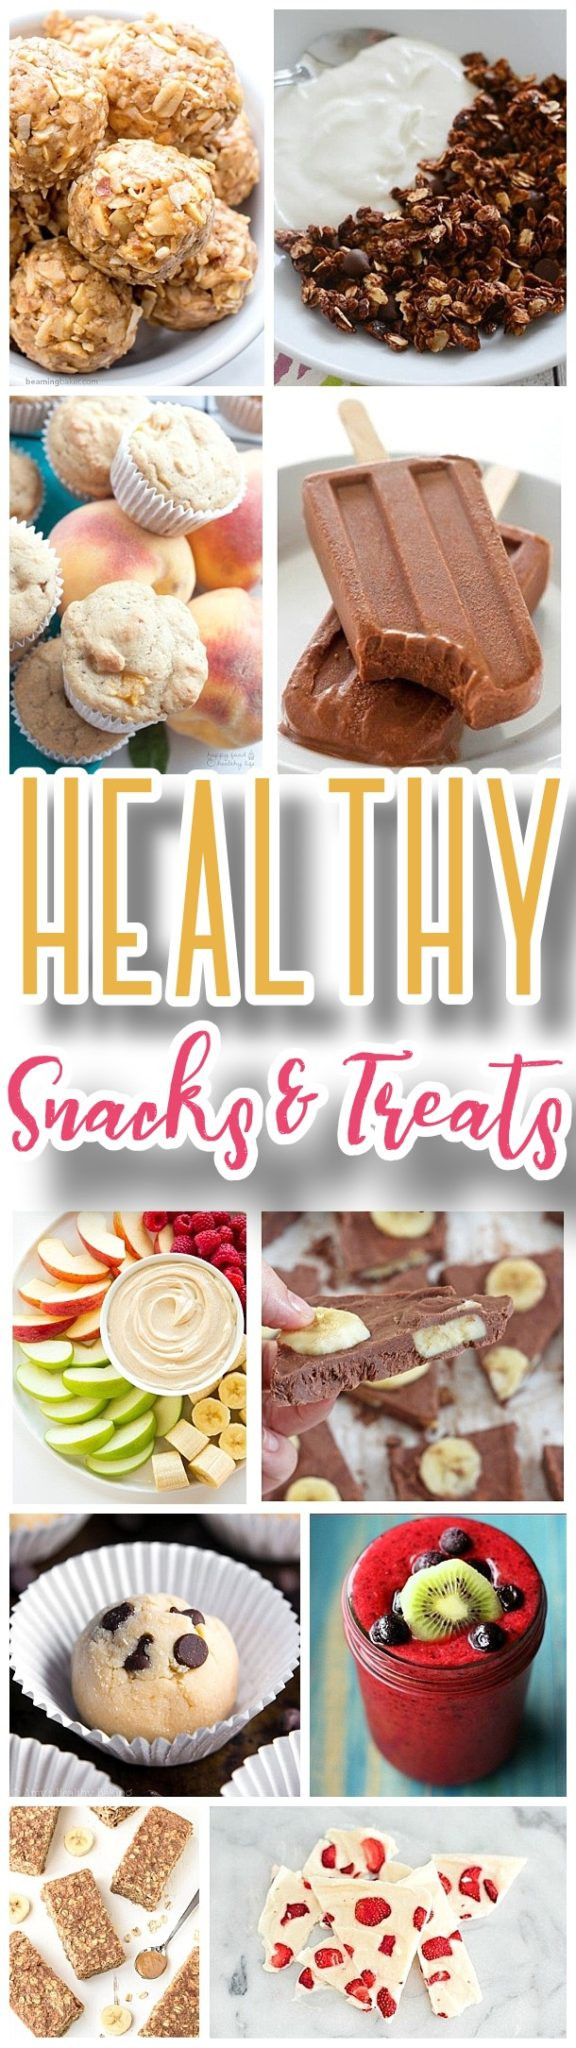 Healthy Snacks For Kids Recipes Quick
 Healthy Snacks and Treats Recipes The BEST and Yummiest